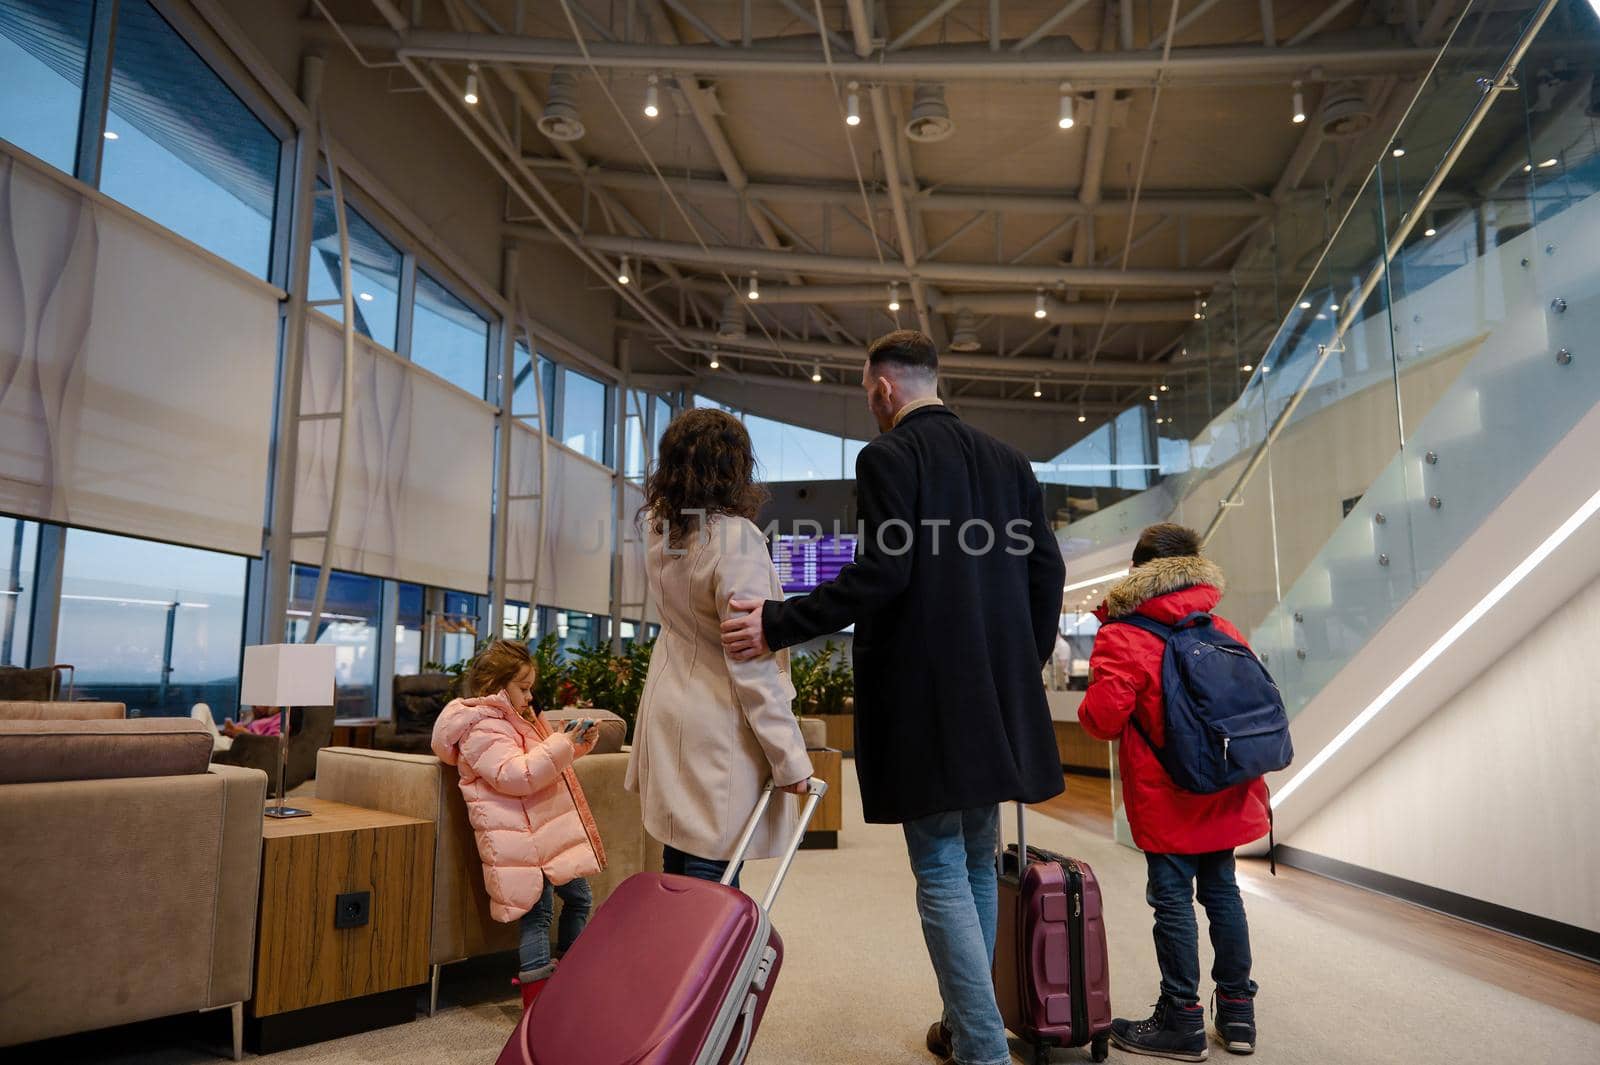 Rear view of traveling family in warm clothes with suitcases checking flight information on board with timetable, standing in the international airport departures terminal, waiting to board flight